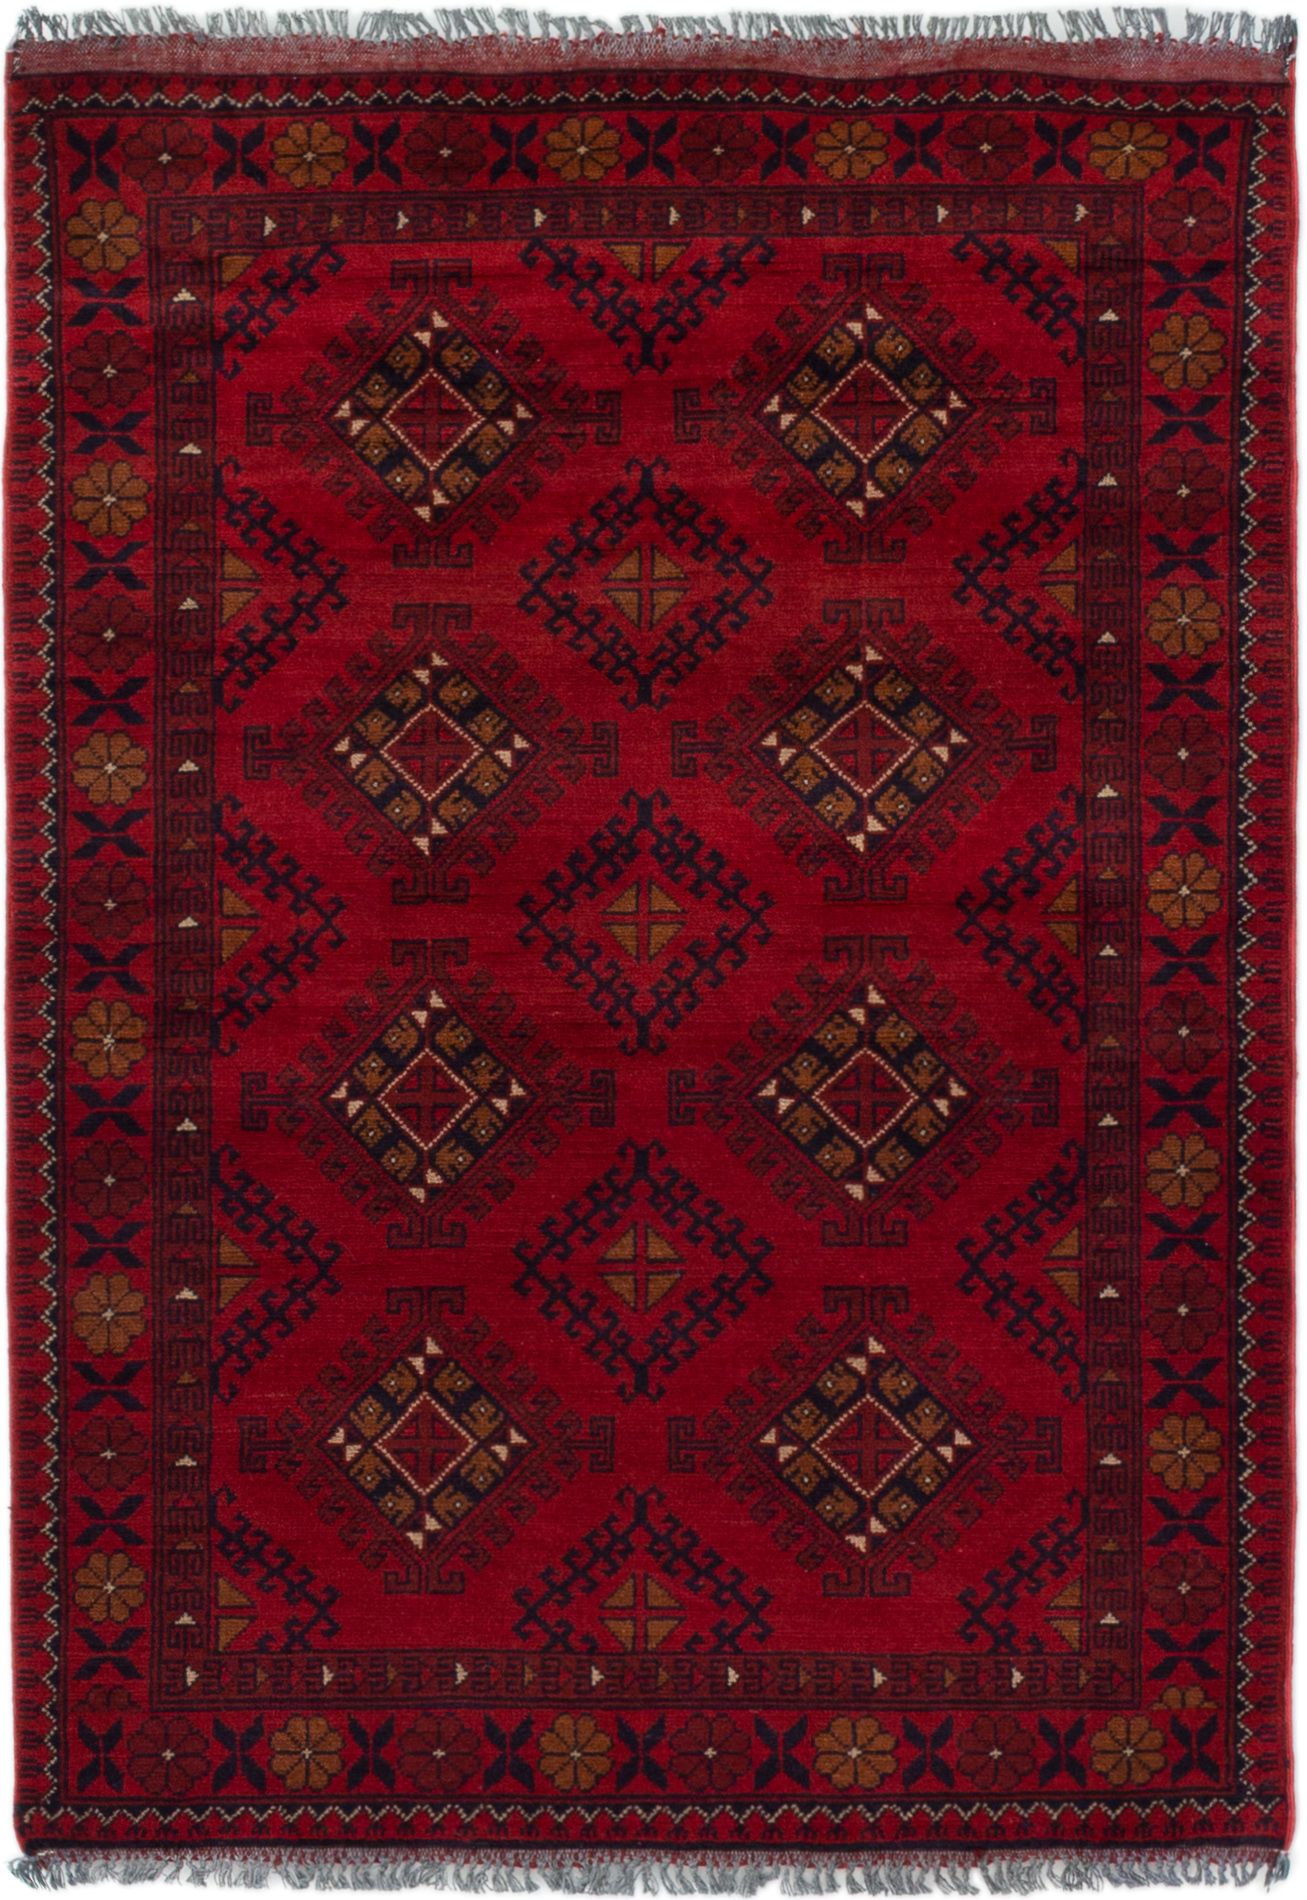 Hand-knotted Finest Khal Mohammadi Red Wool Rug 3'5" x 4'10" (30) Size: 3'5" x 4'10"  